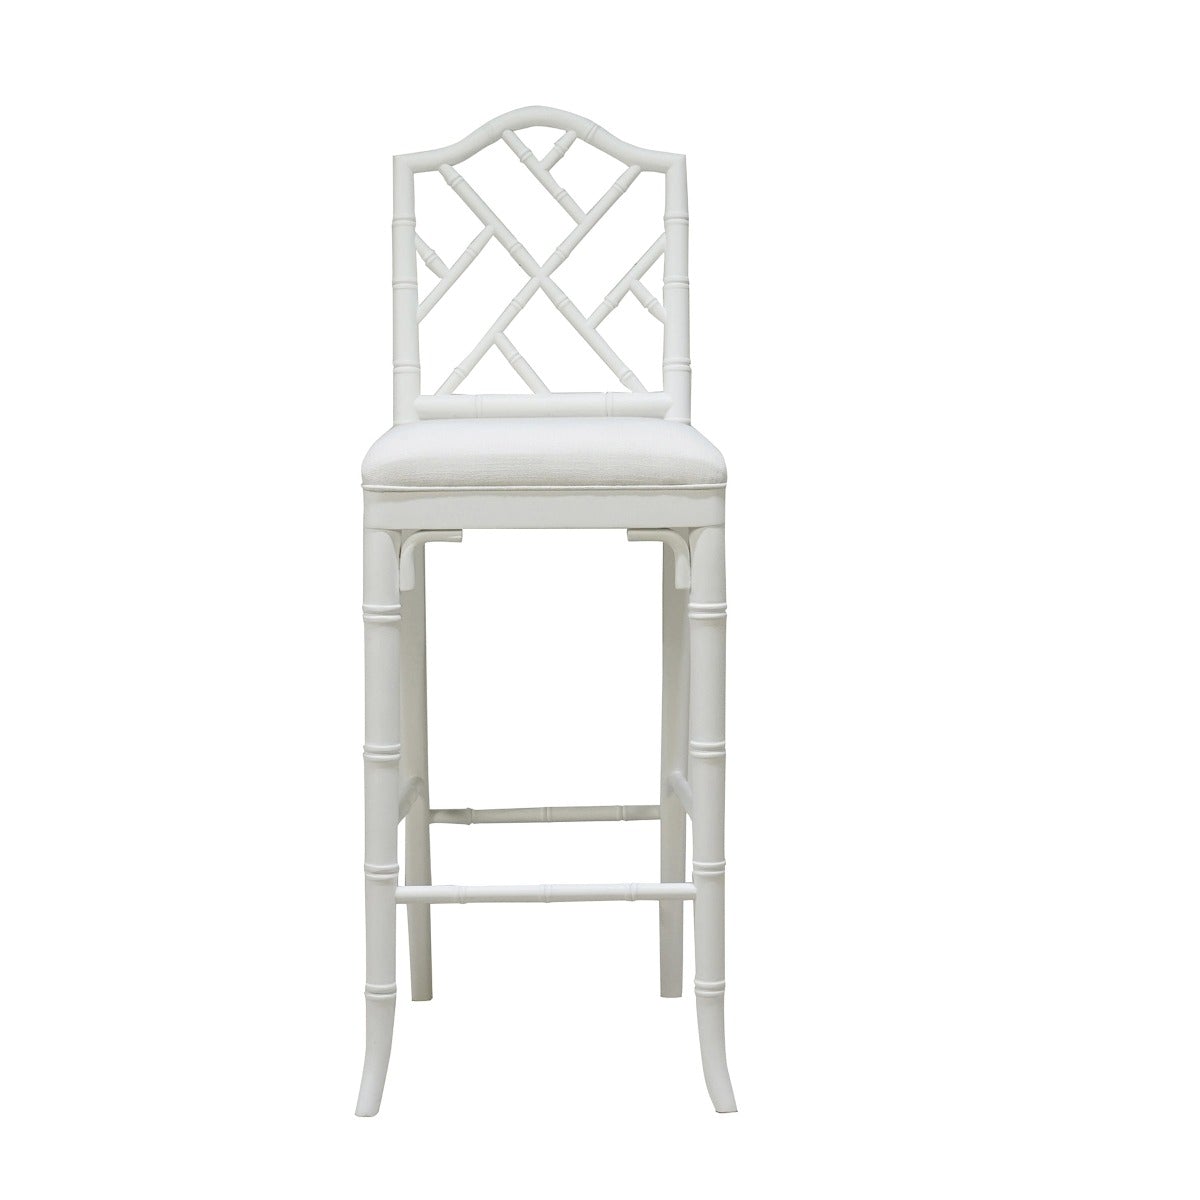 Chippendale Bar Stool Matte White Lacquer. Front view.